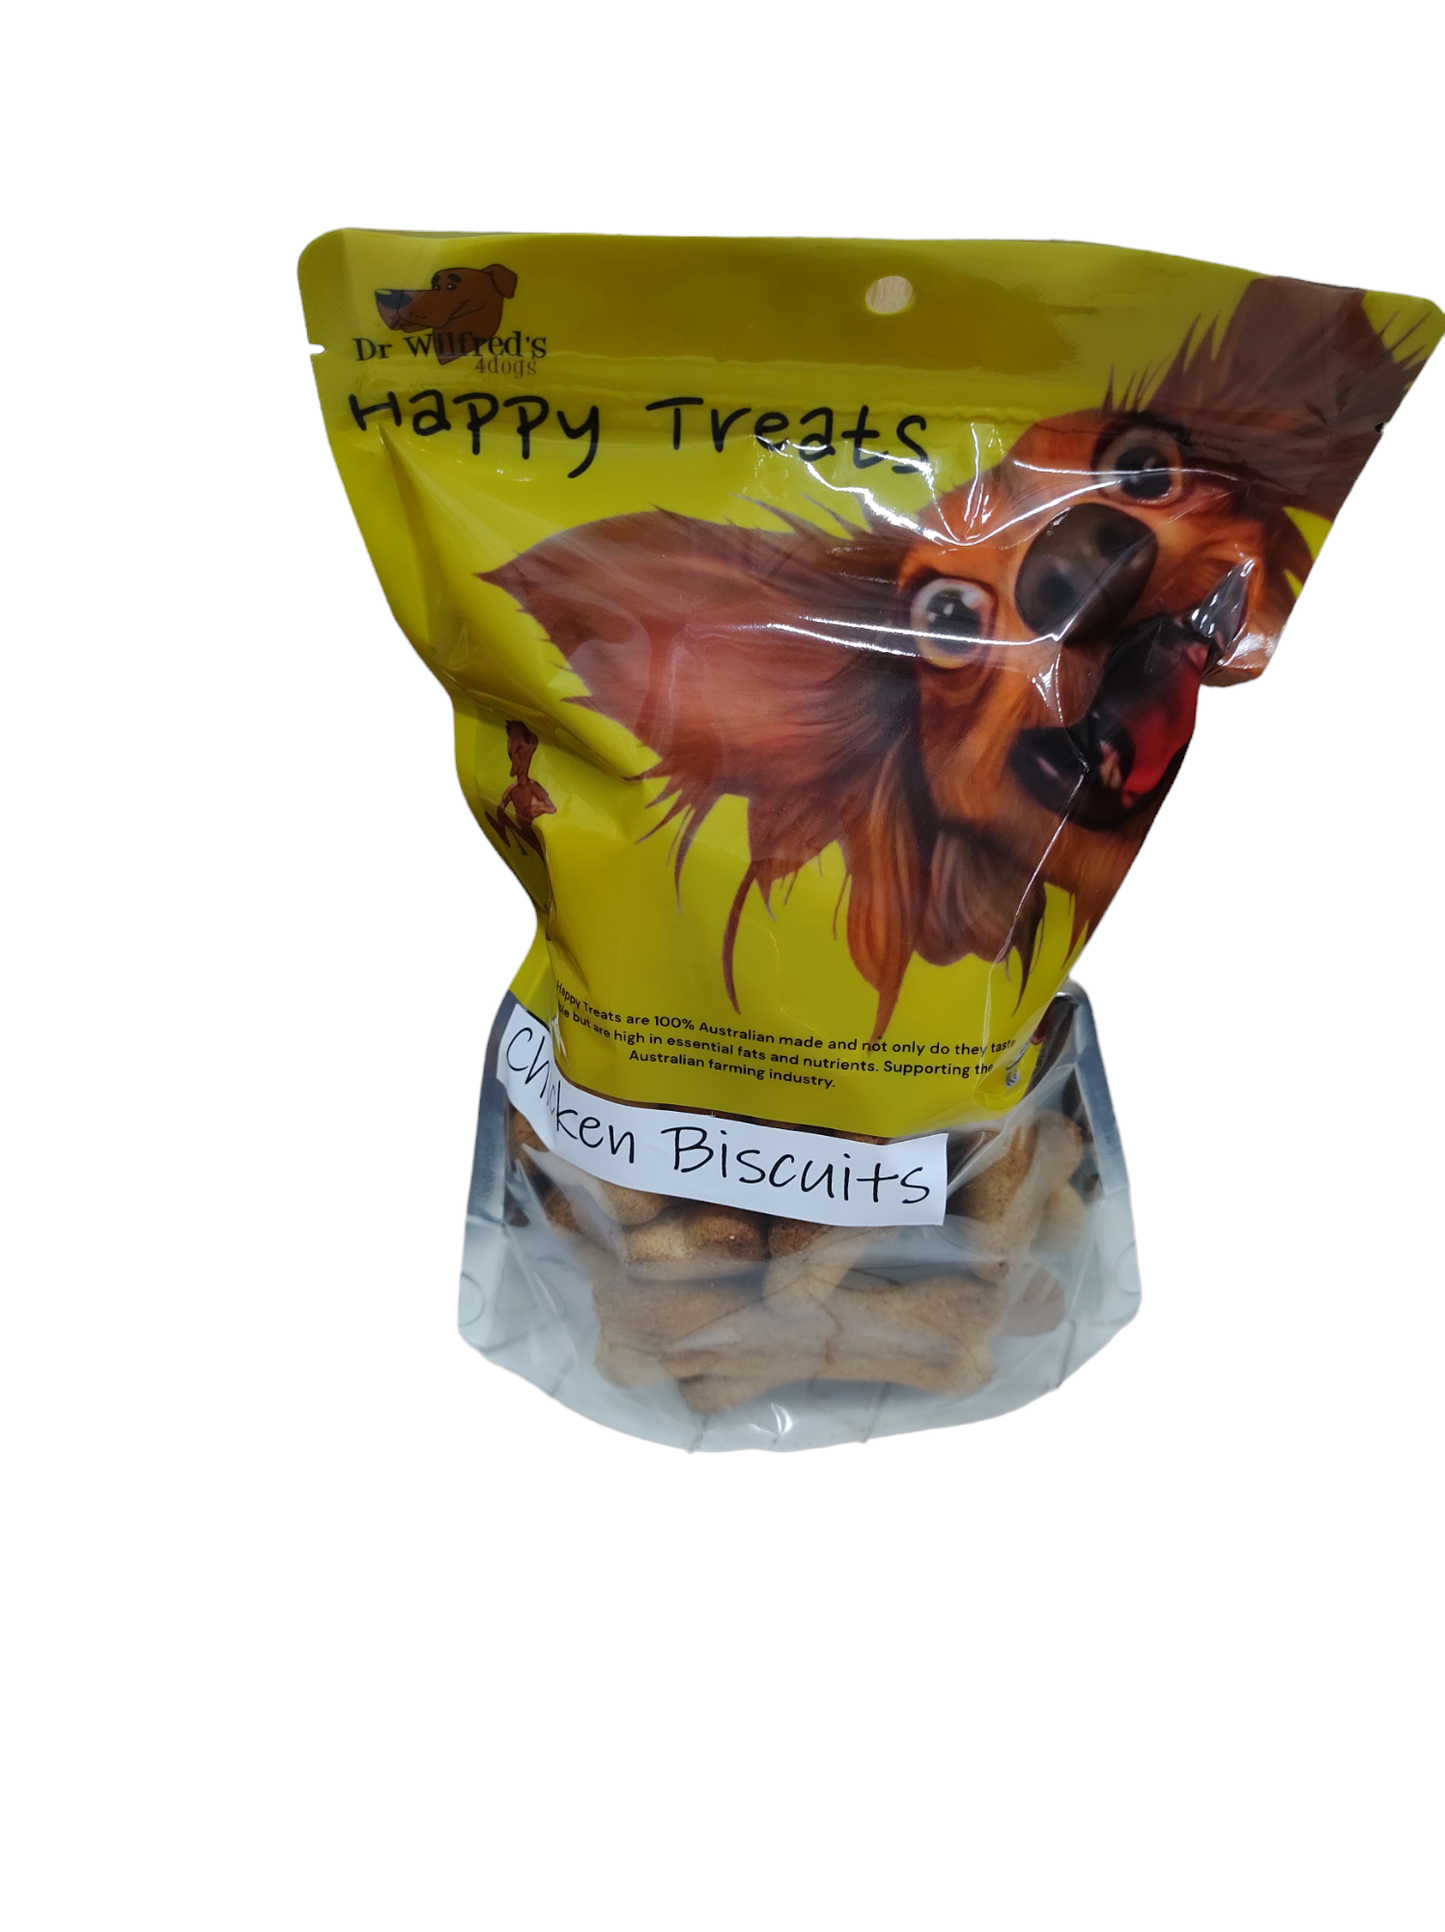 Dr Wilfred's Happy Treats Chicken Category